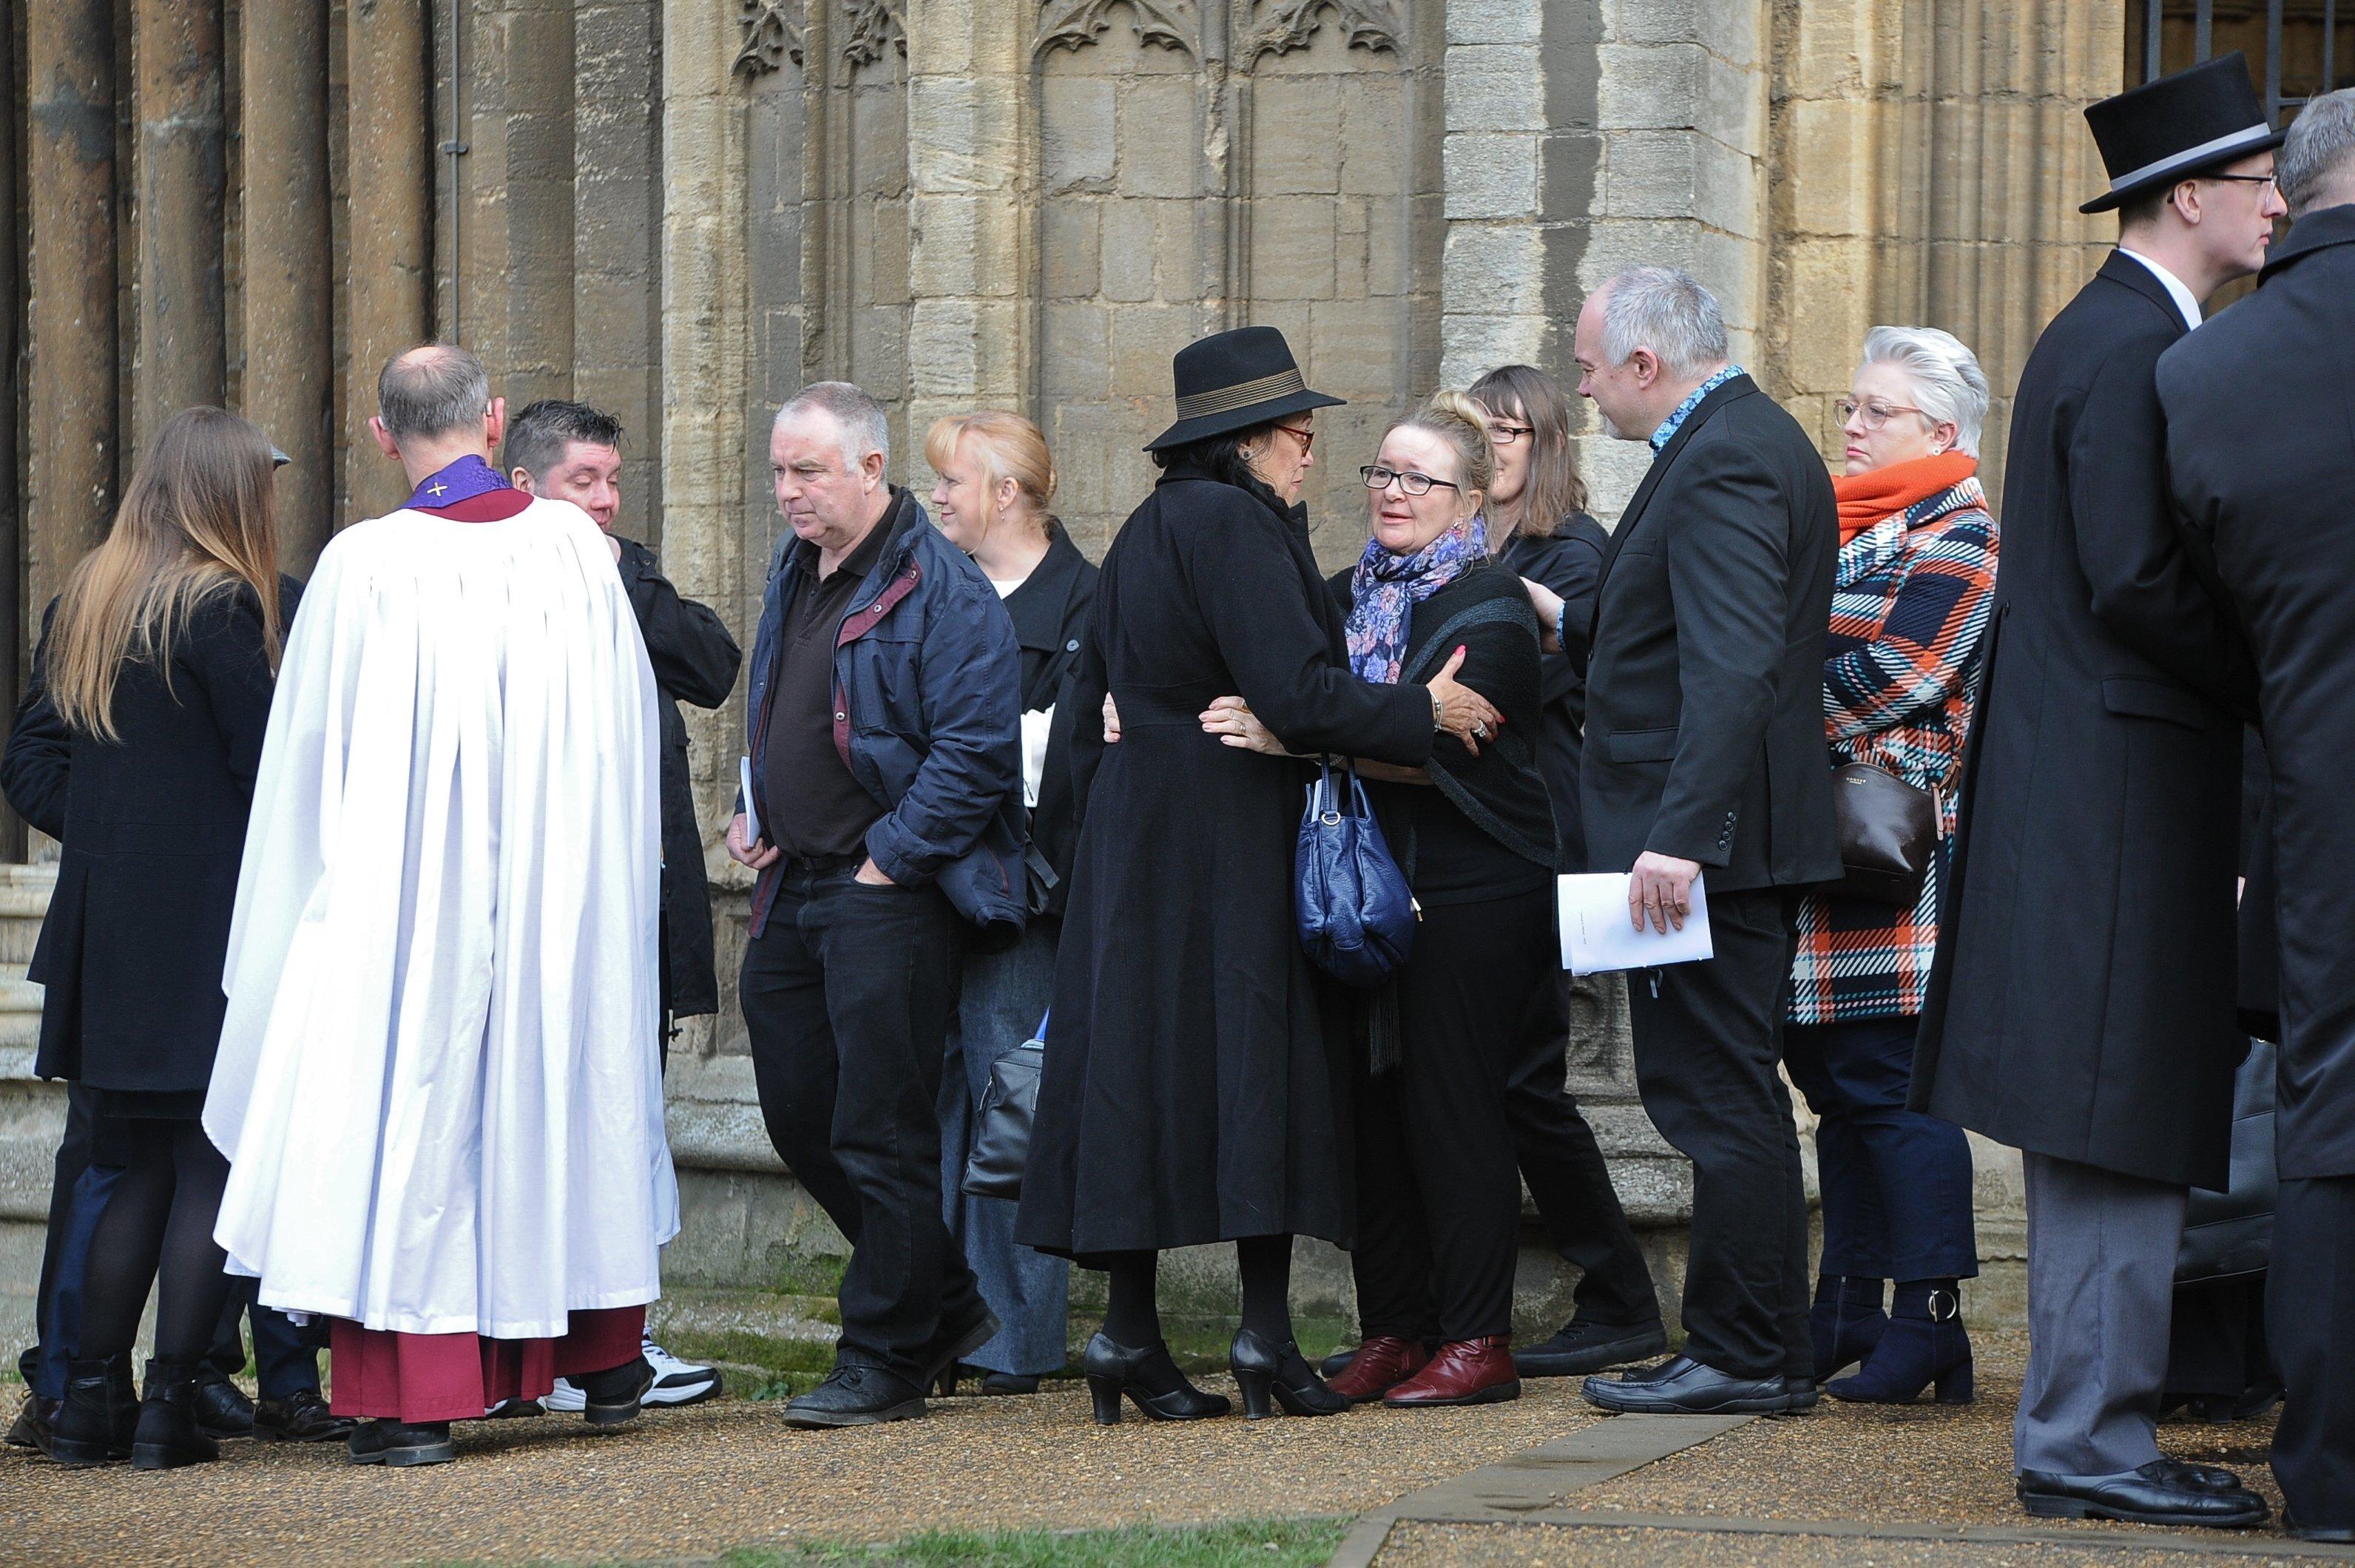 Service at Peterborough Cathedral